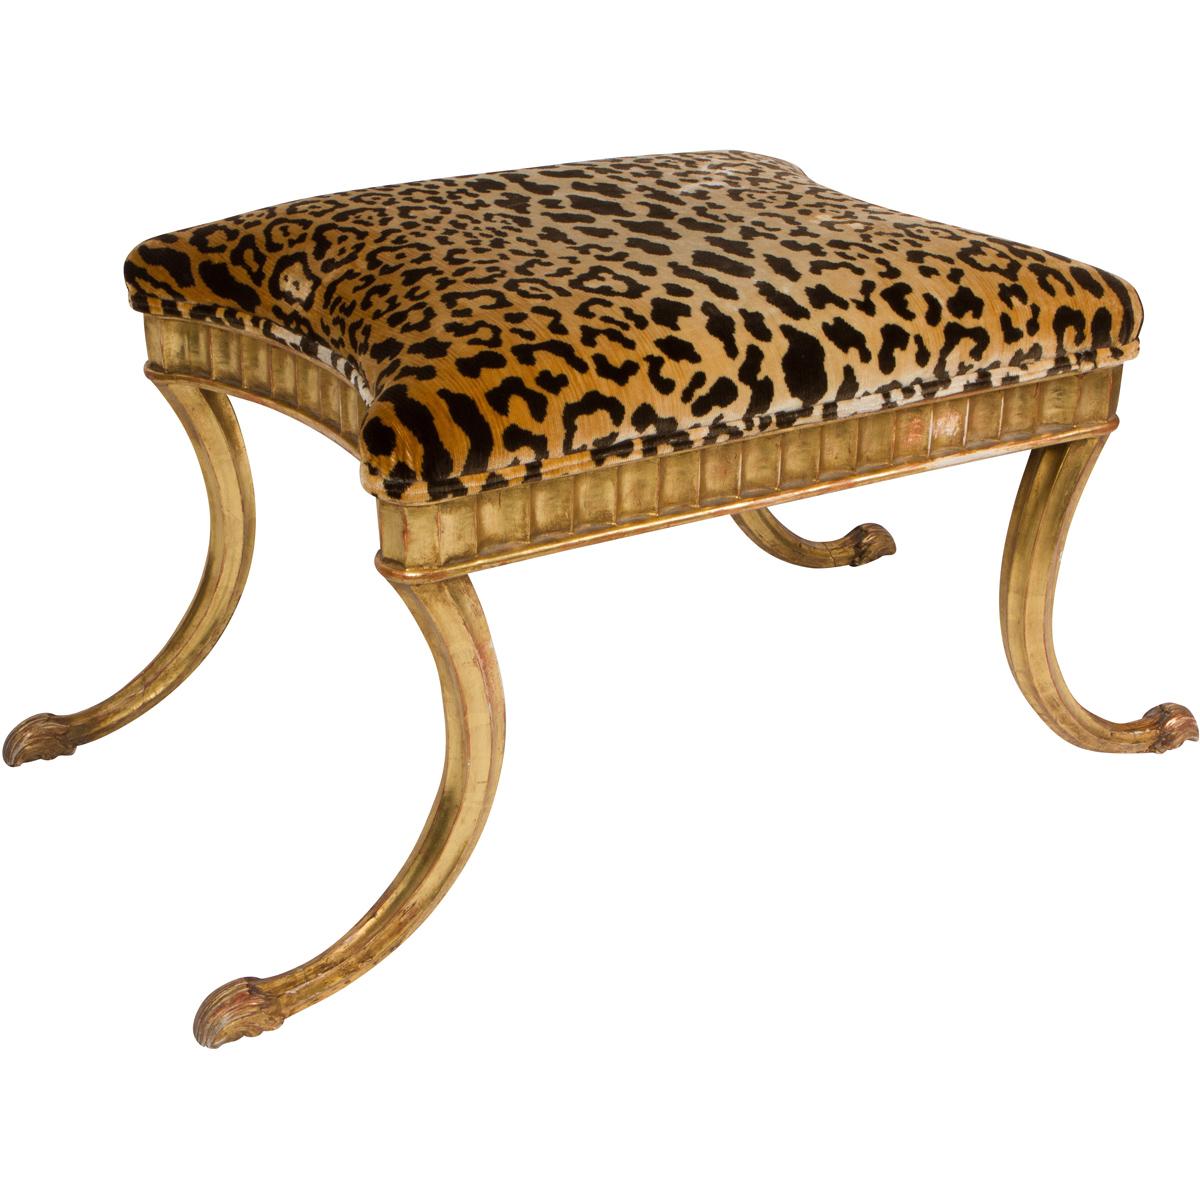 Stunning giltwood bench in a Klismos style, upholstered in leopard velvet by Mioni.